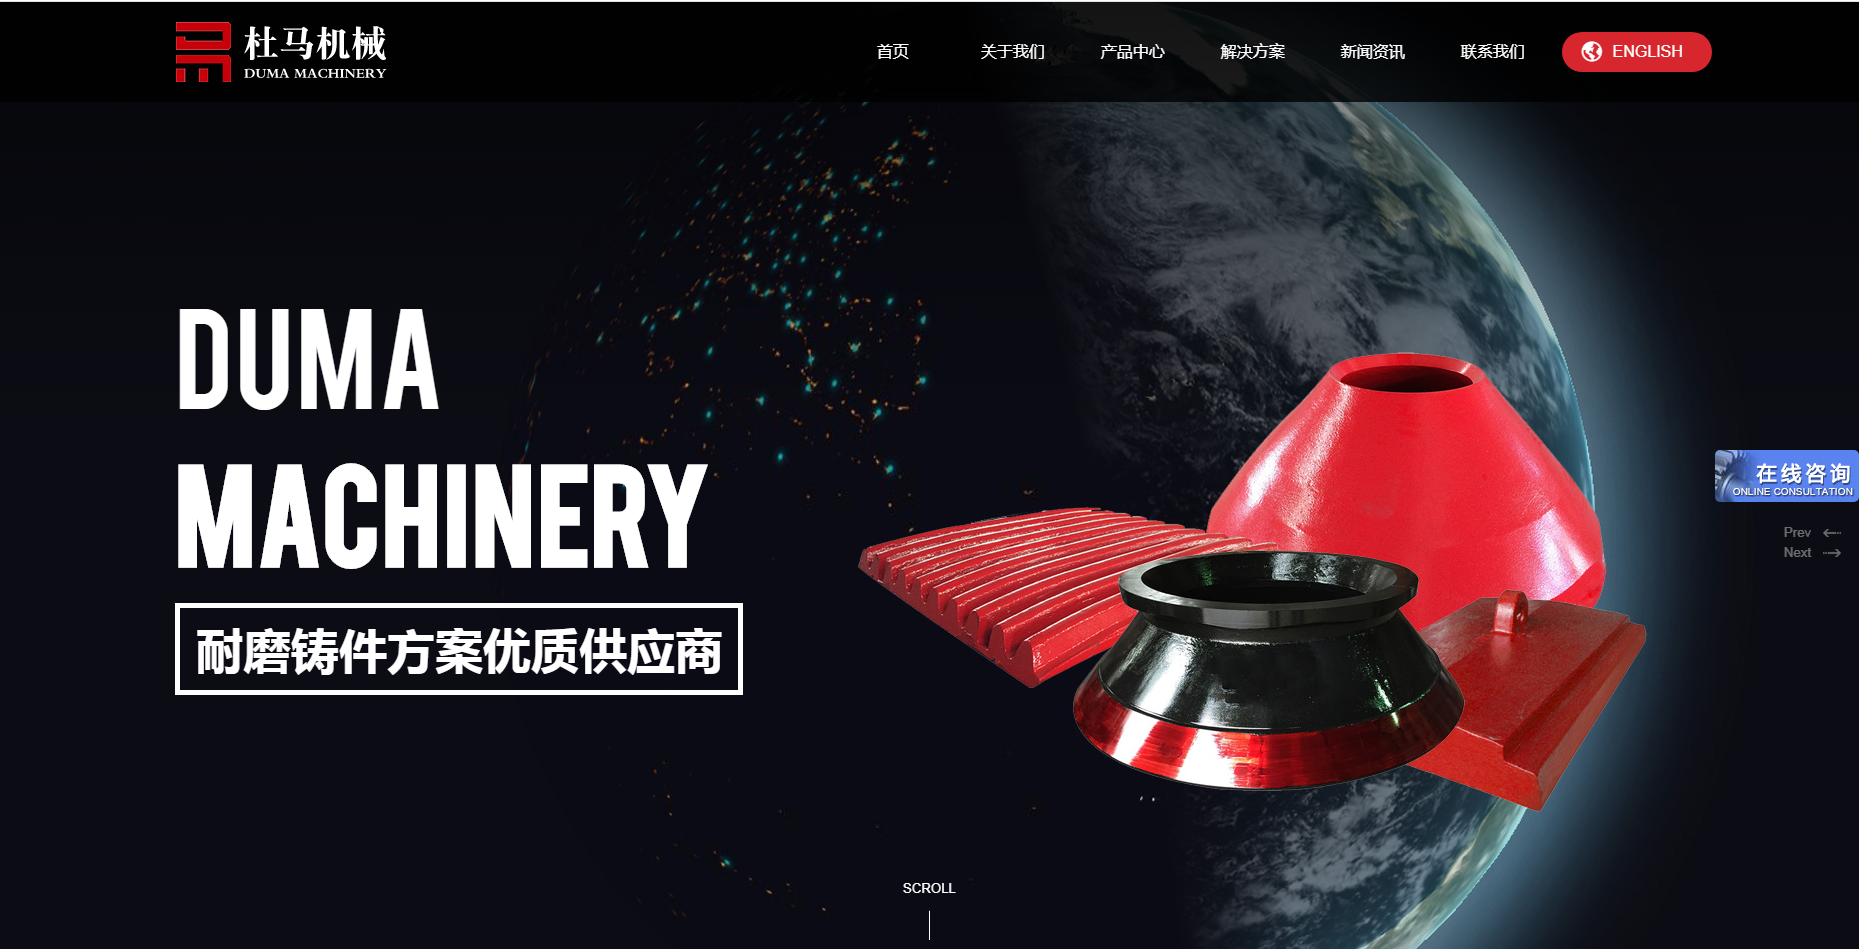 Warmly congratulate Jiangxi Duma machinery official website officially revised online!